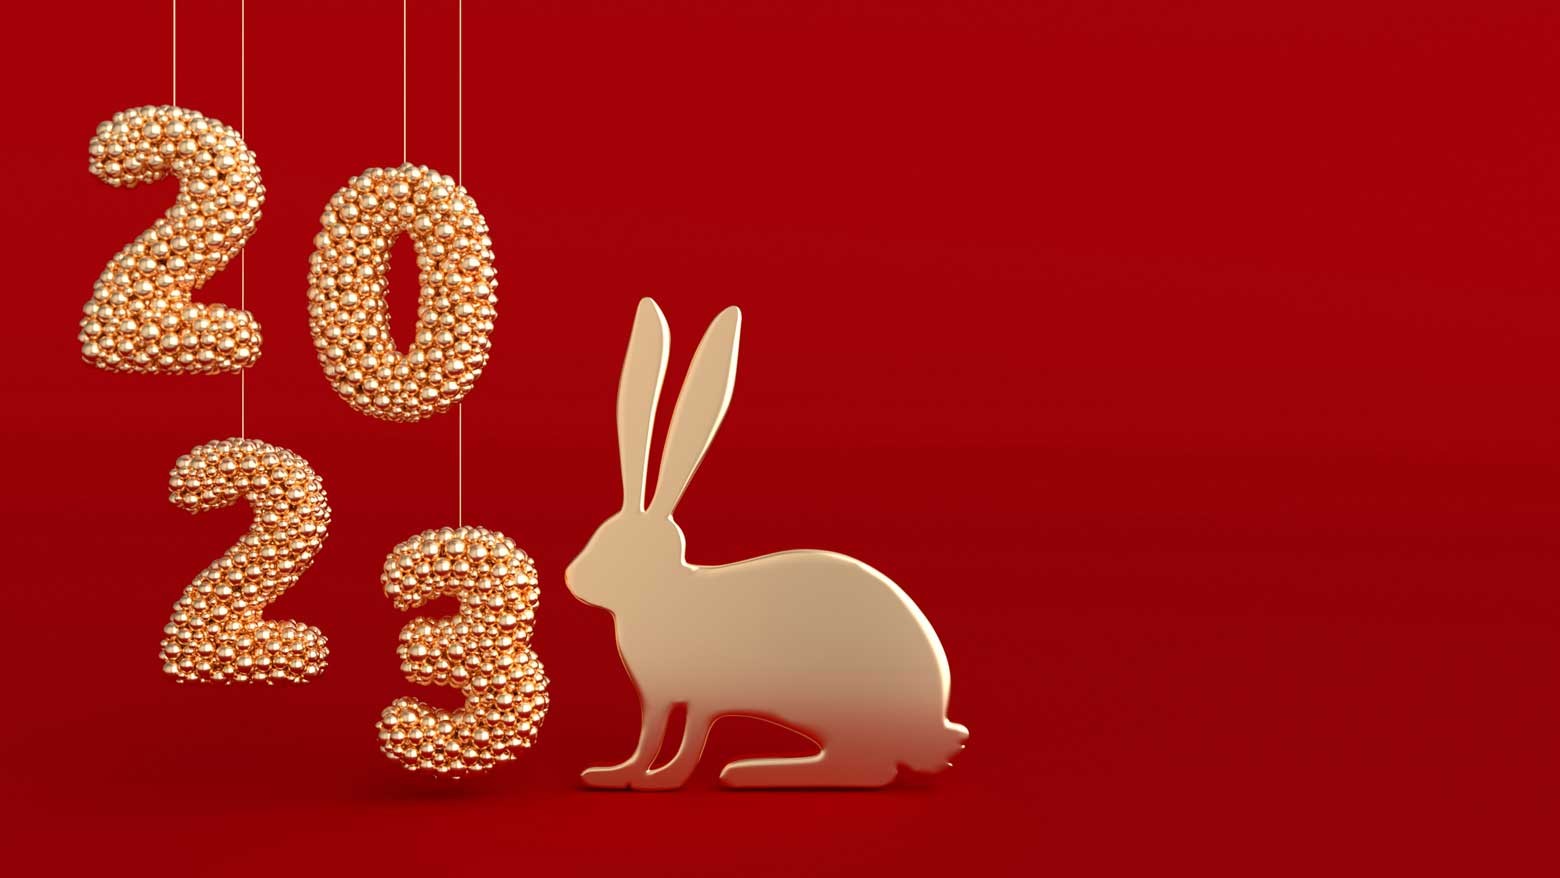 The Year of the RABBIT